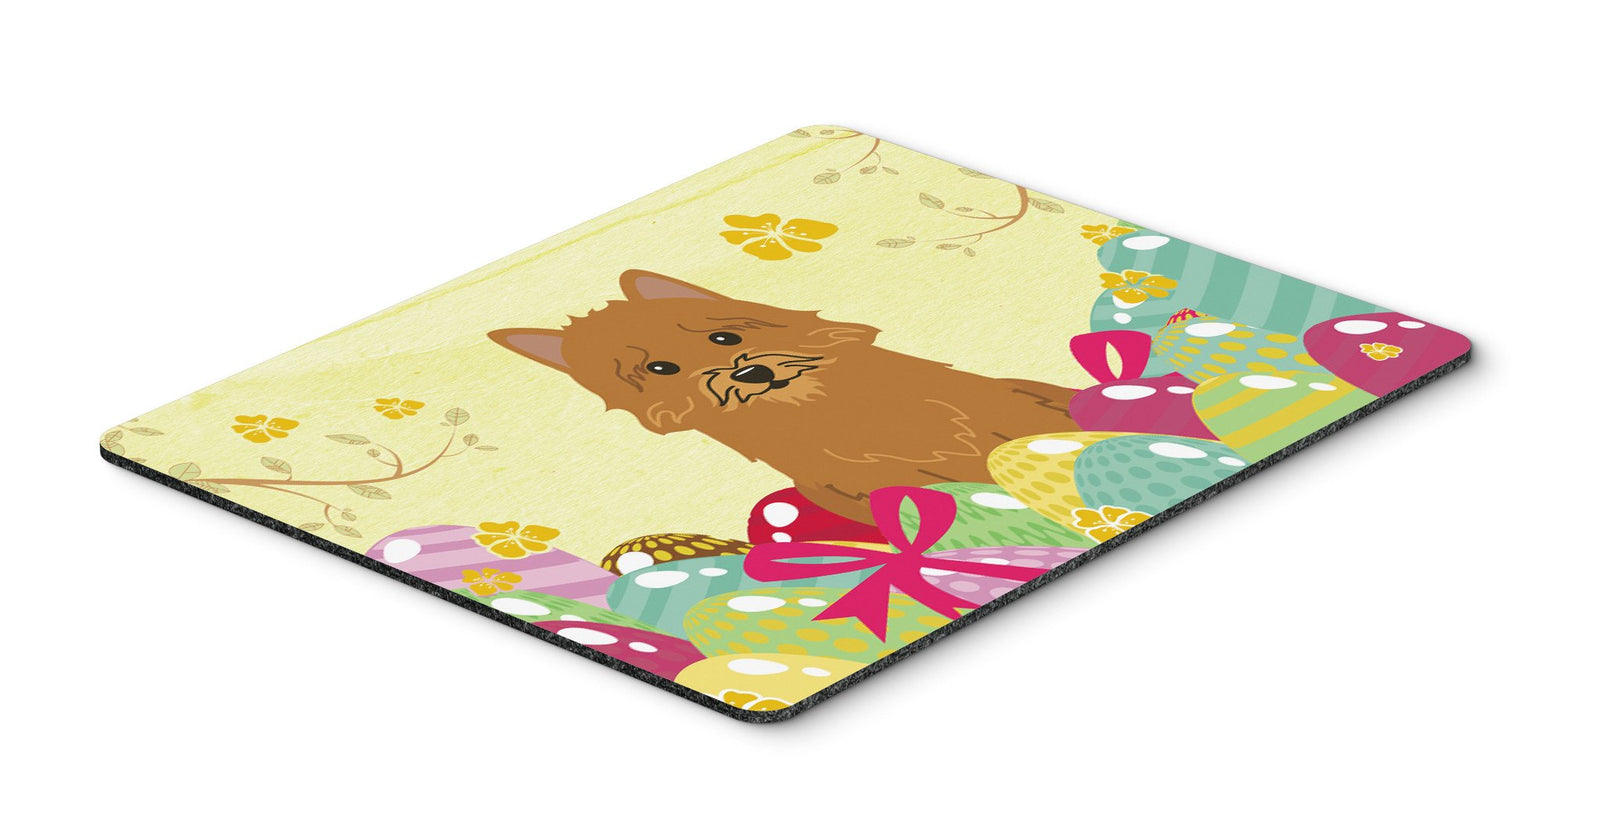 Easter Eggs Norwich Terrier Mouse Pad, Hot Pad or Trivet BB6020MP by Caroline's Treasures